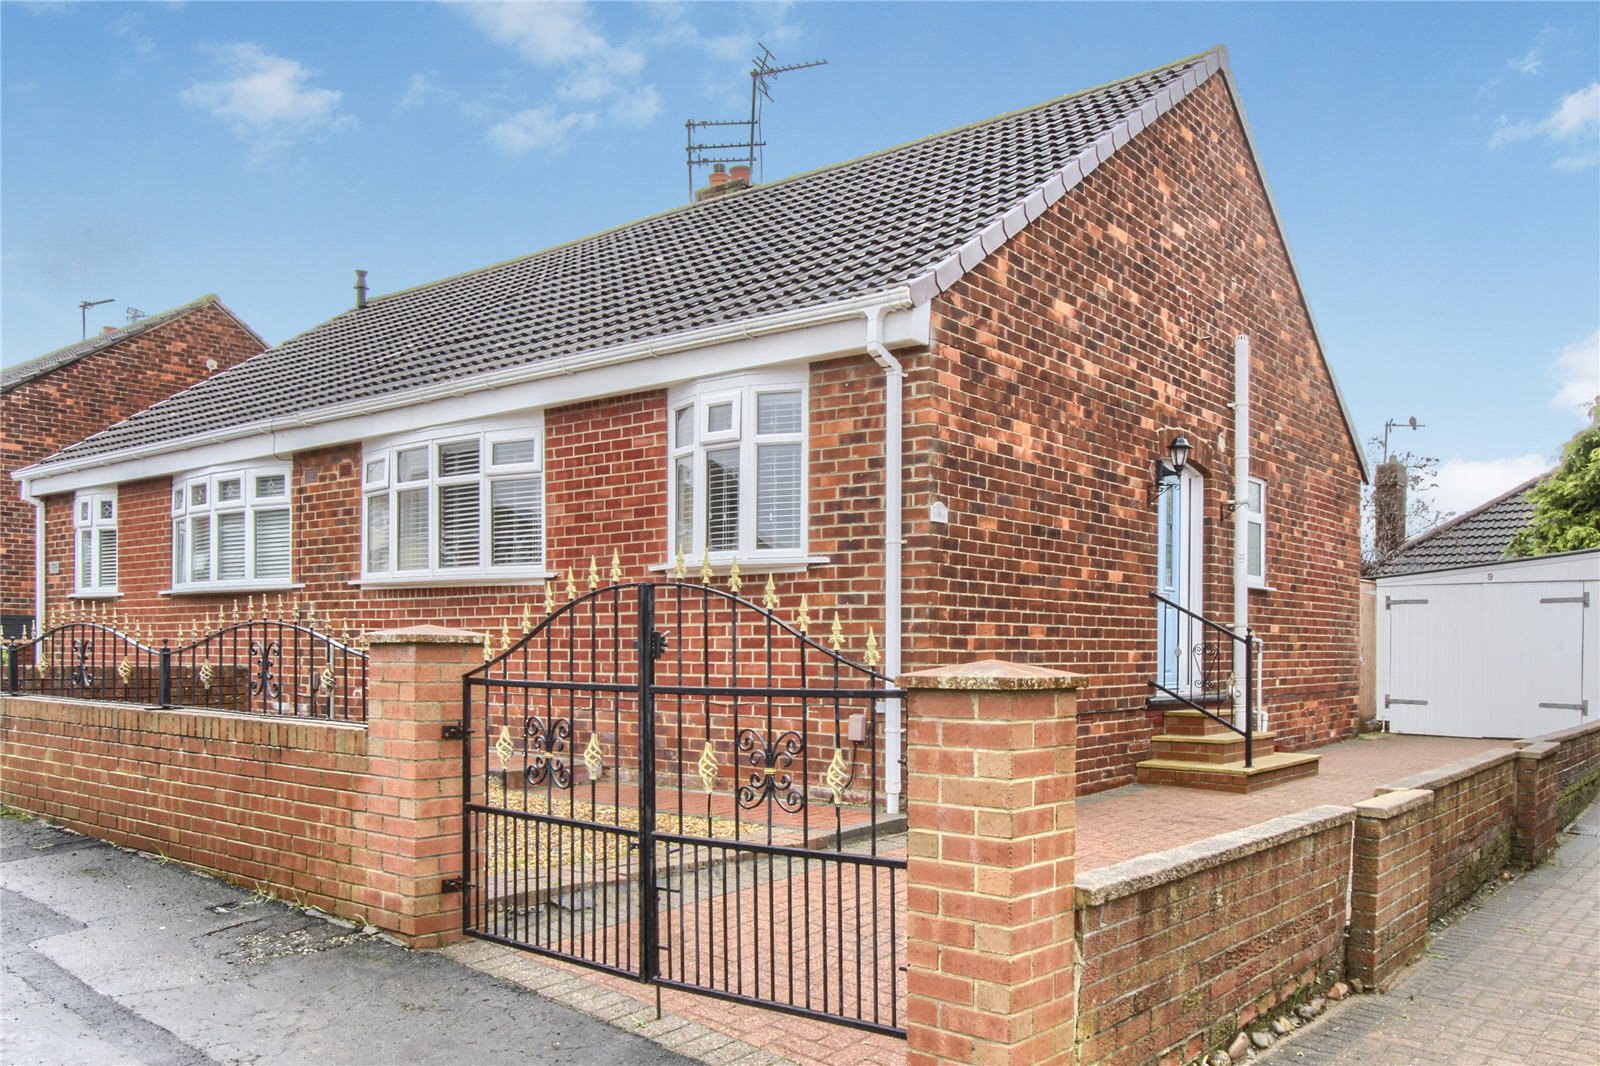 2 bed bungalow for sale in Sunnybank Road, Ormesby - Property Image 1